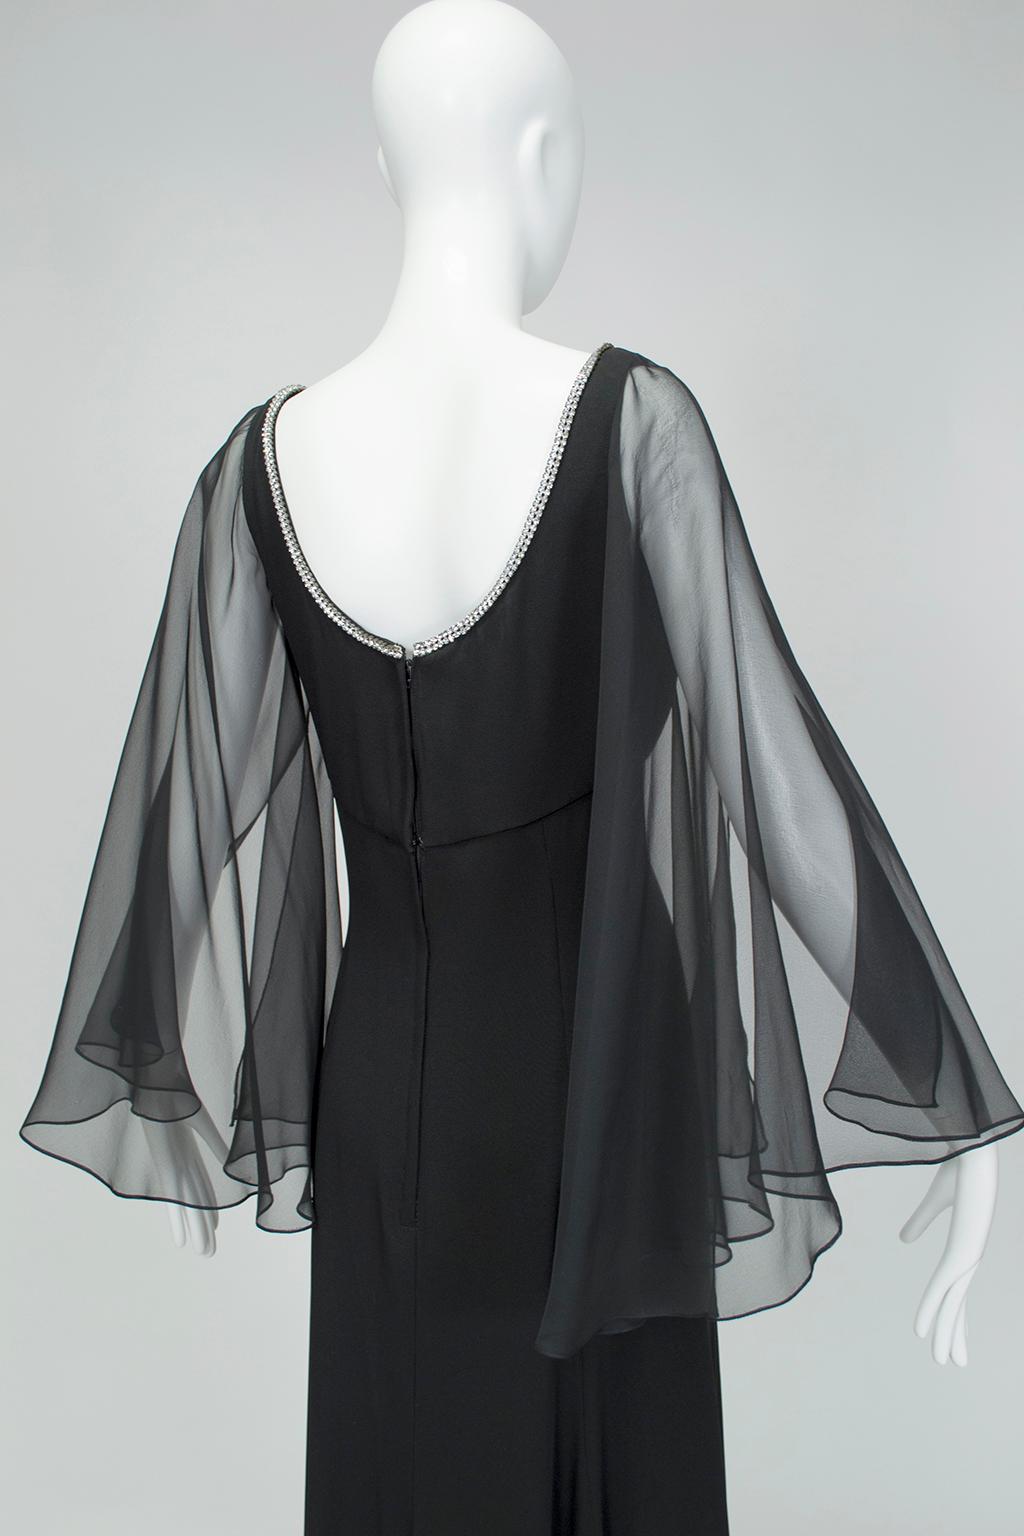 Women's Lillie Rubin Black Sheer Angel Wing Gown with Rhinestone Plunge - Small, 1960s For Sale